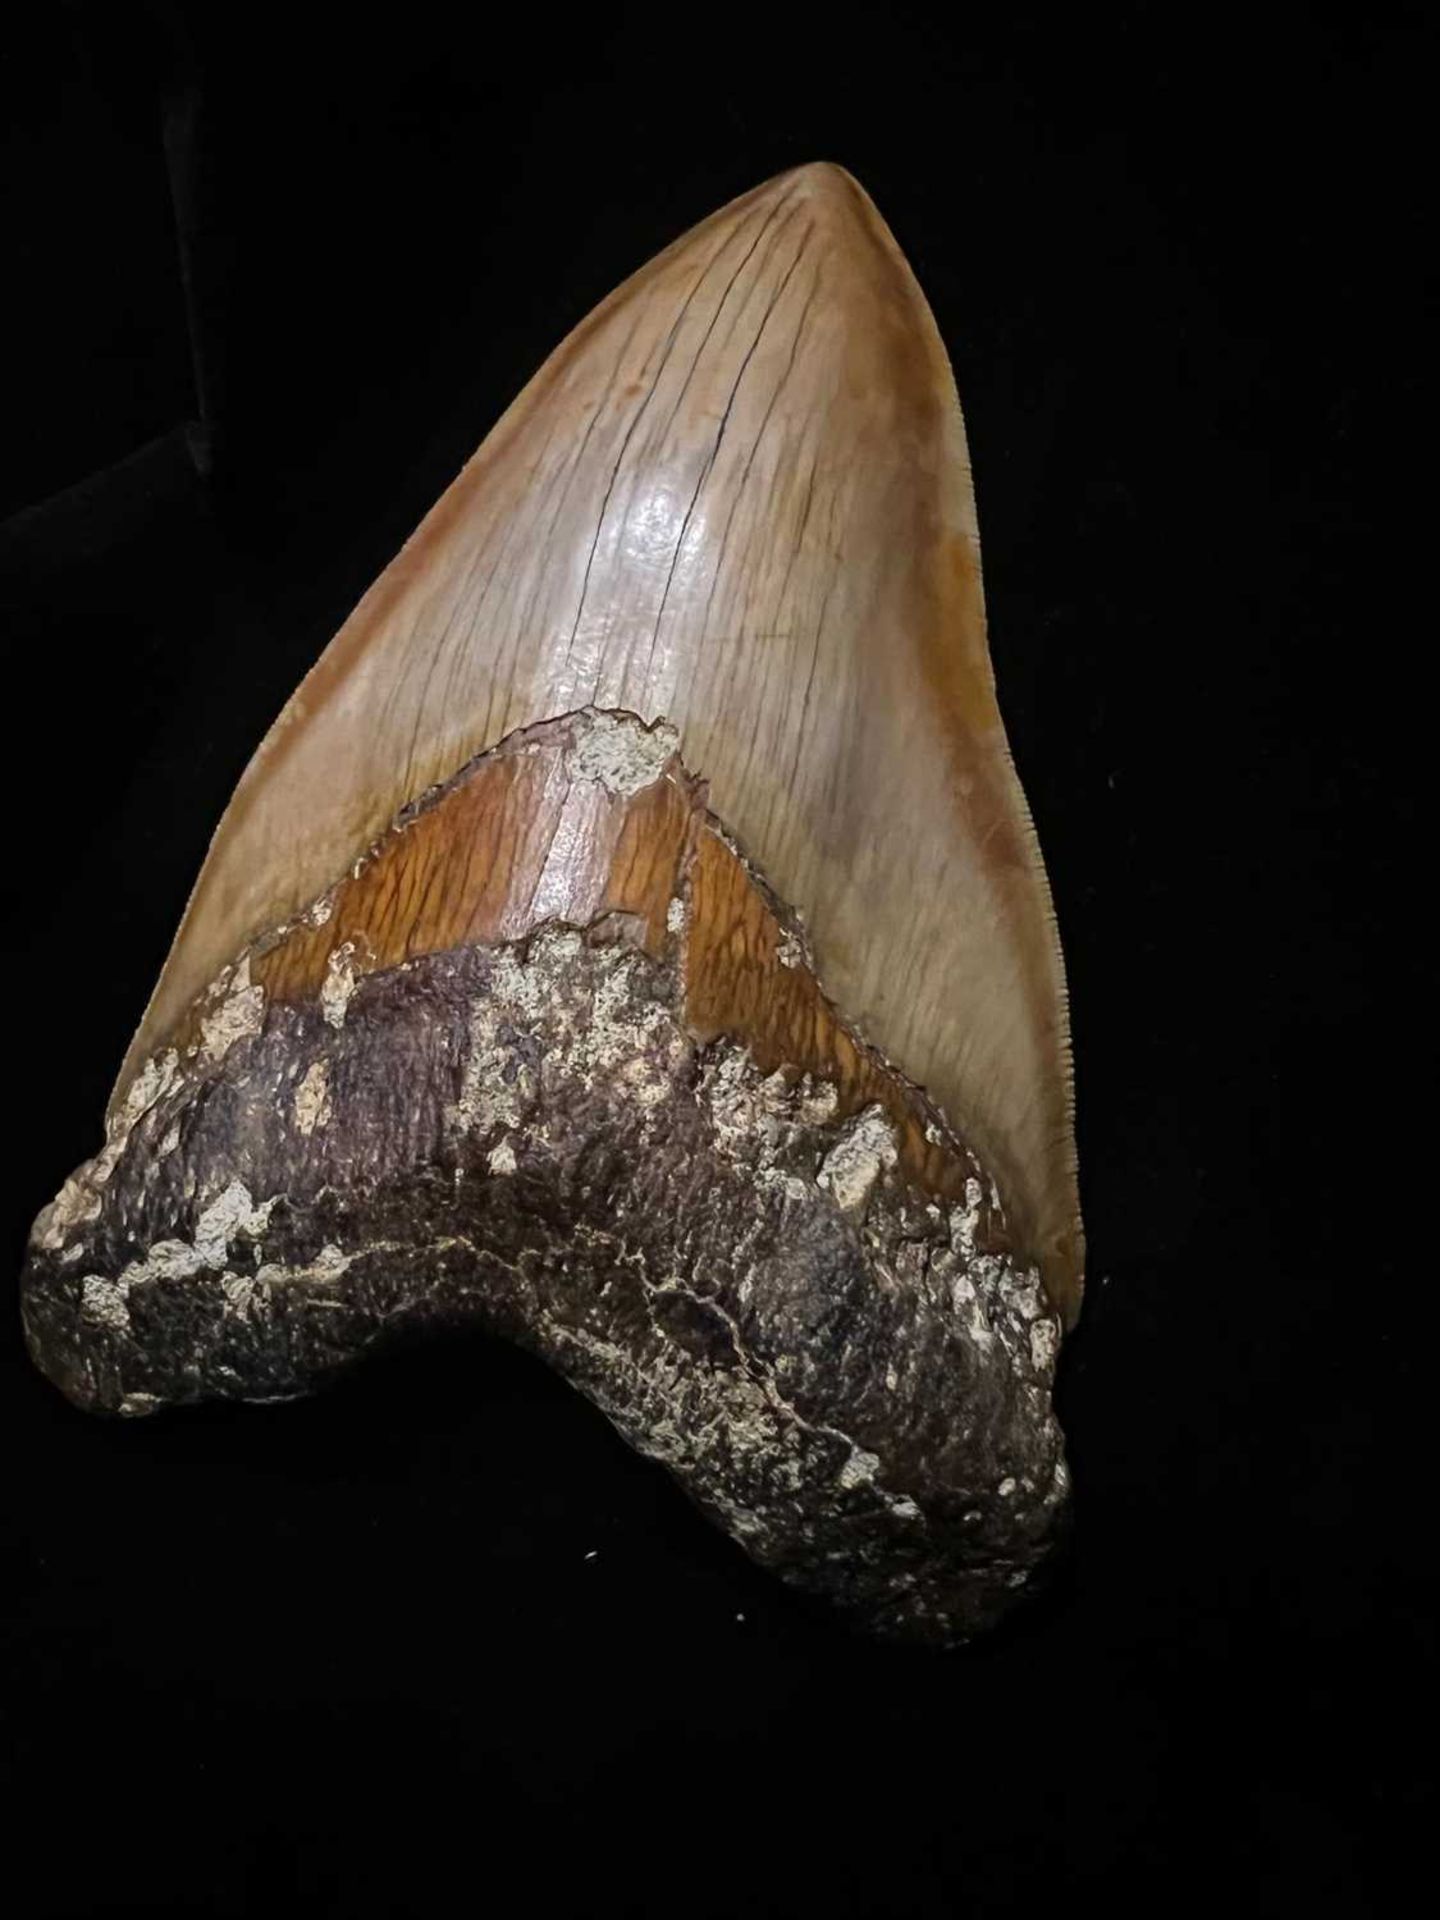 A LARGE FOSSILISED, EXTINCT MEGALODON SHARK TOOTH - Image 5 of 5